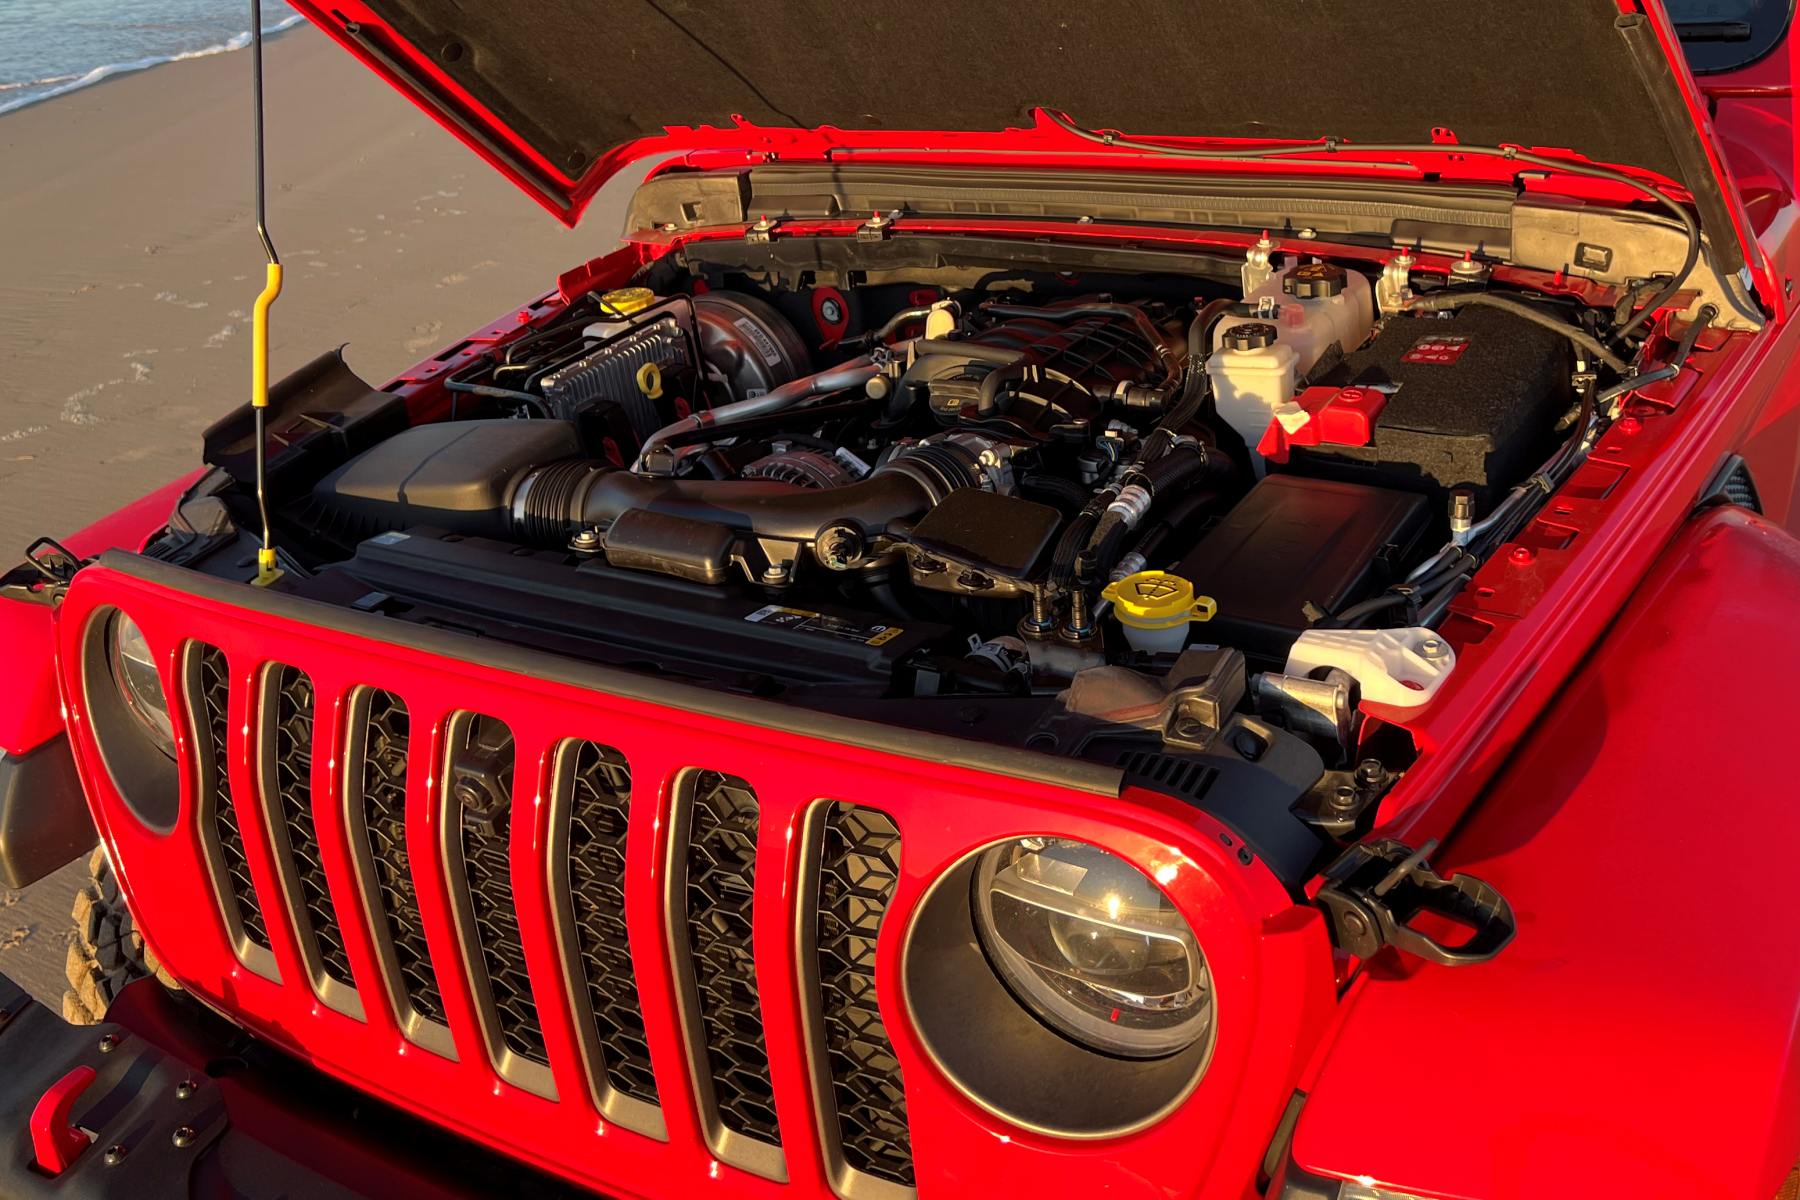 Jeep Wrangler Unlimited Rubicon engine